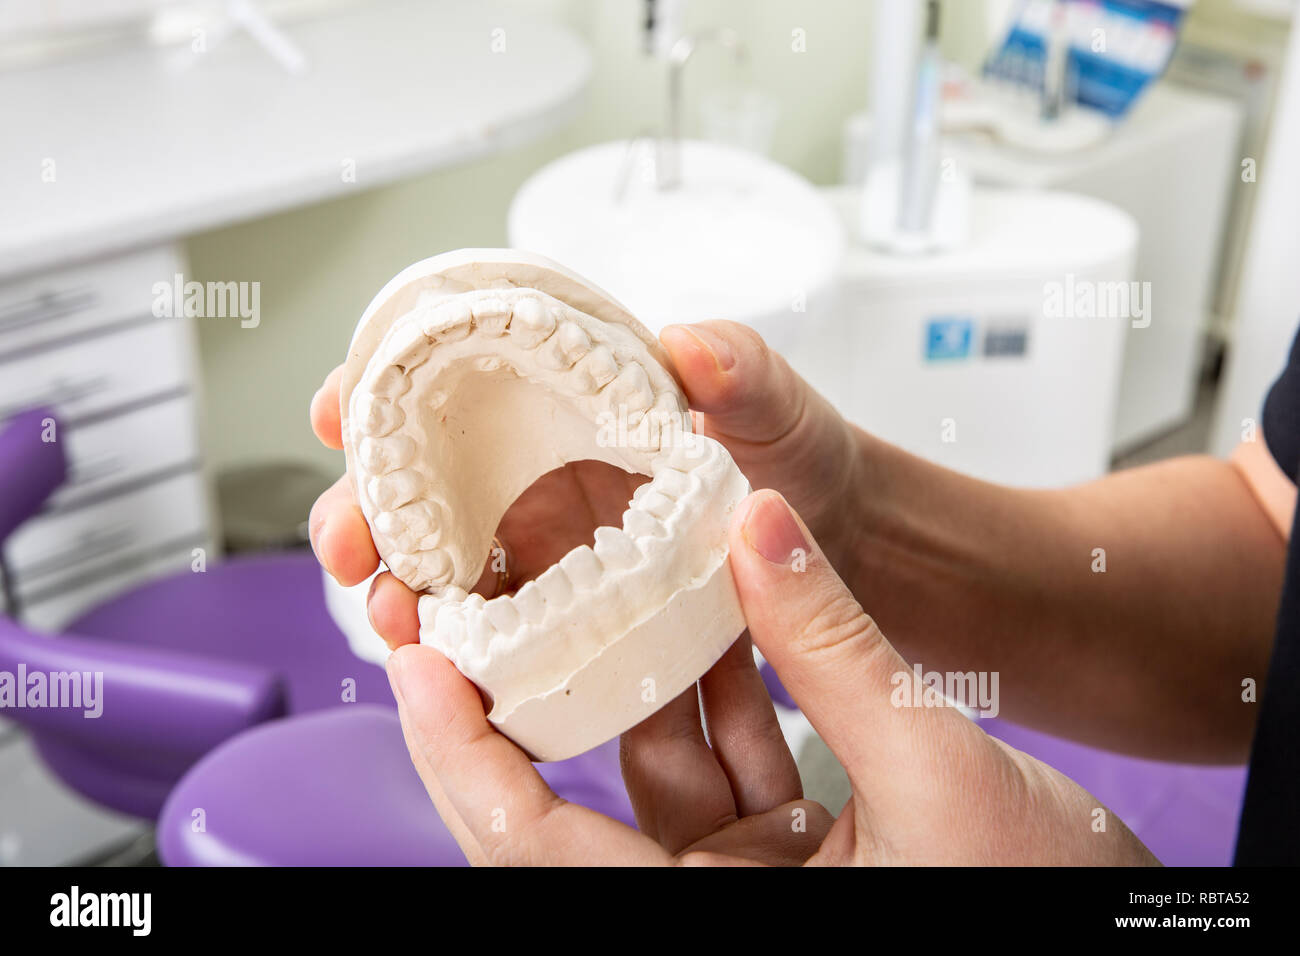 Gypsum model of jaw with teeth in in the hands of a dentist Stock Photo